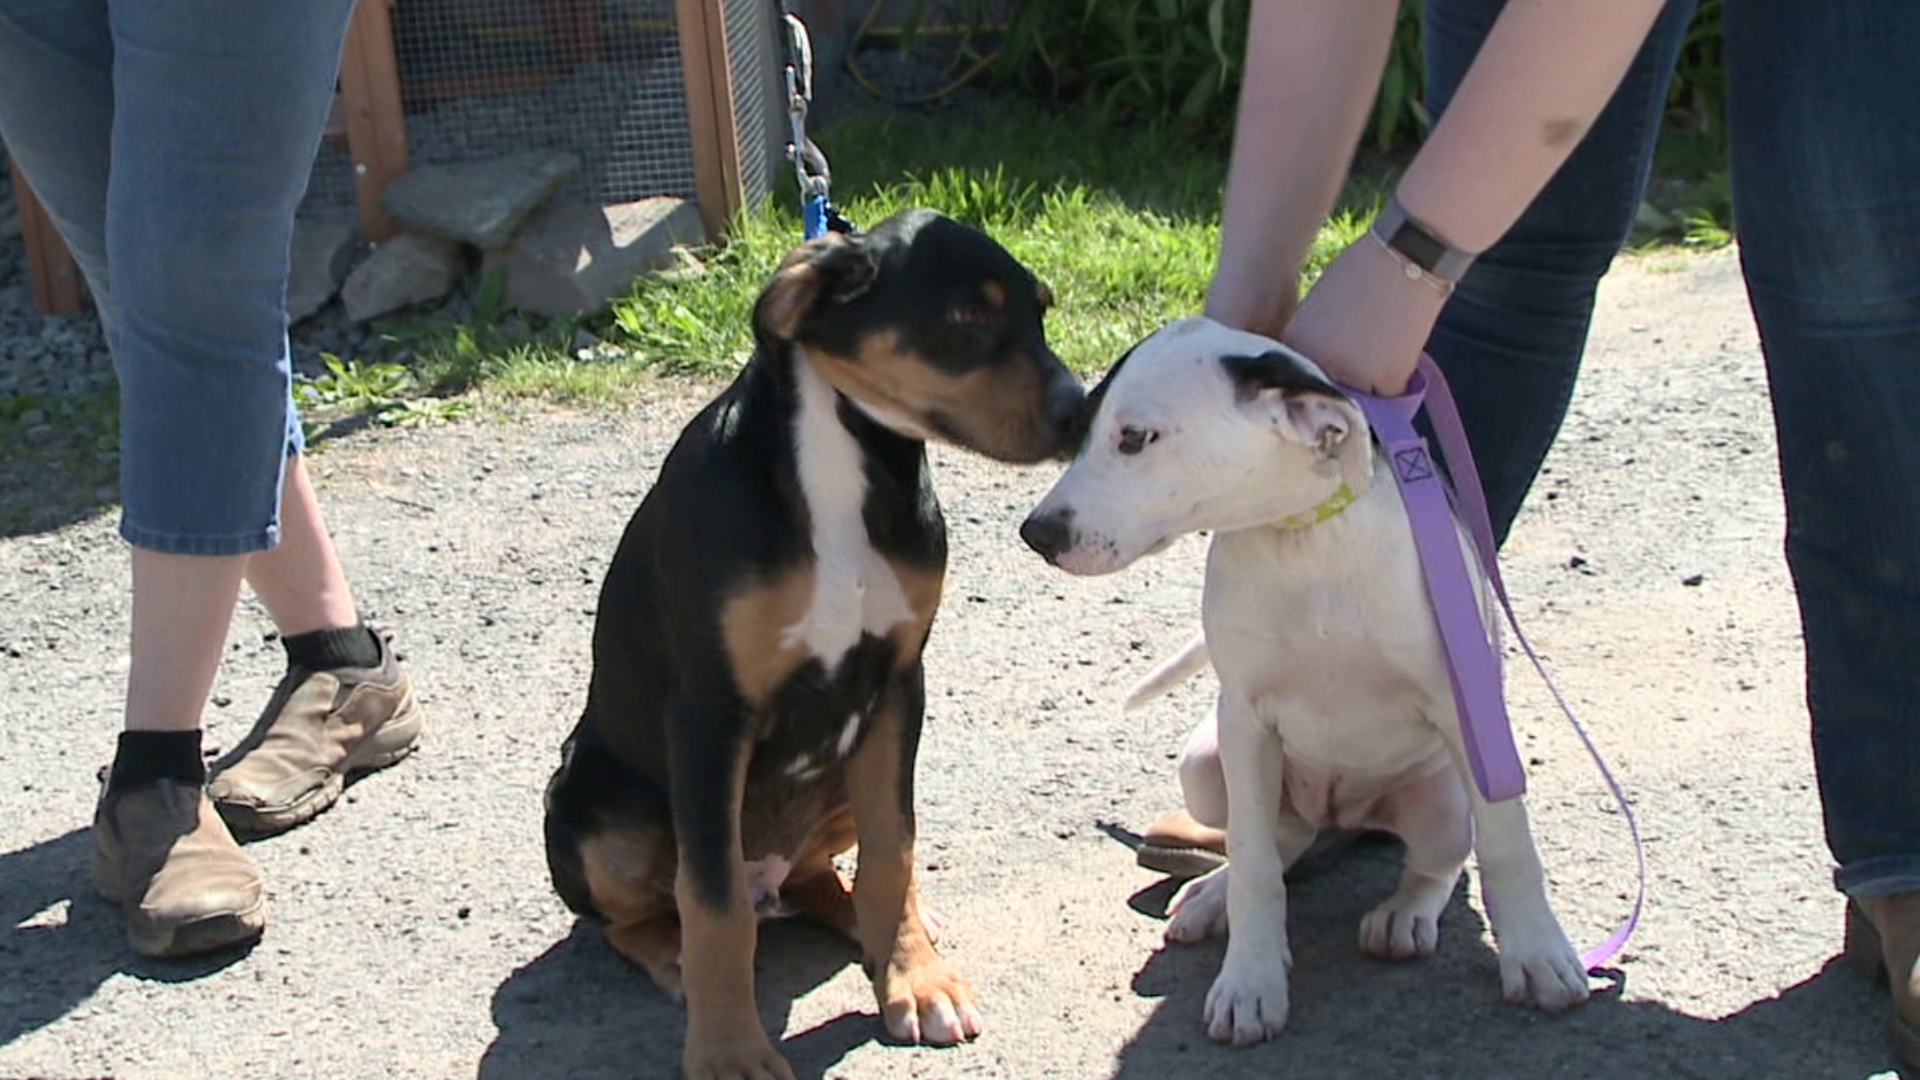 A video of a hound and her horde of puppies at an animal rescue in Susquehanna County went viral... and now some of those puppies are headed to their forever homes.